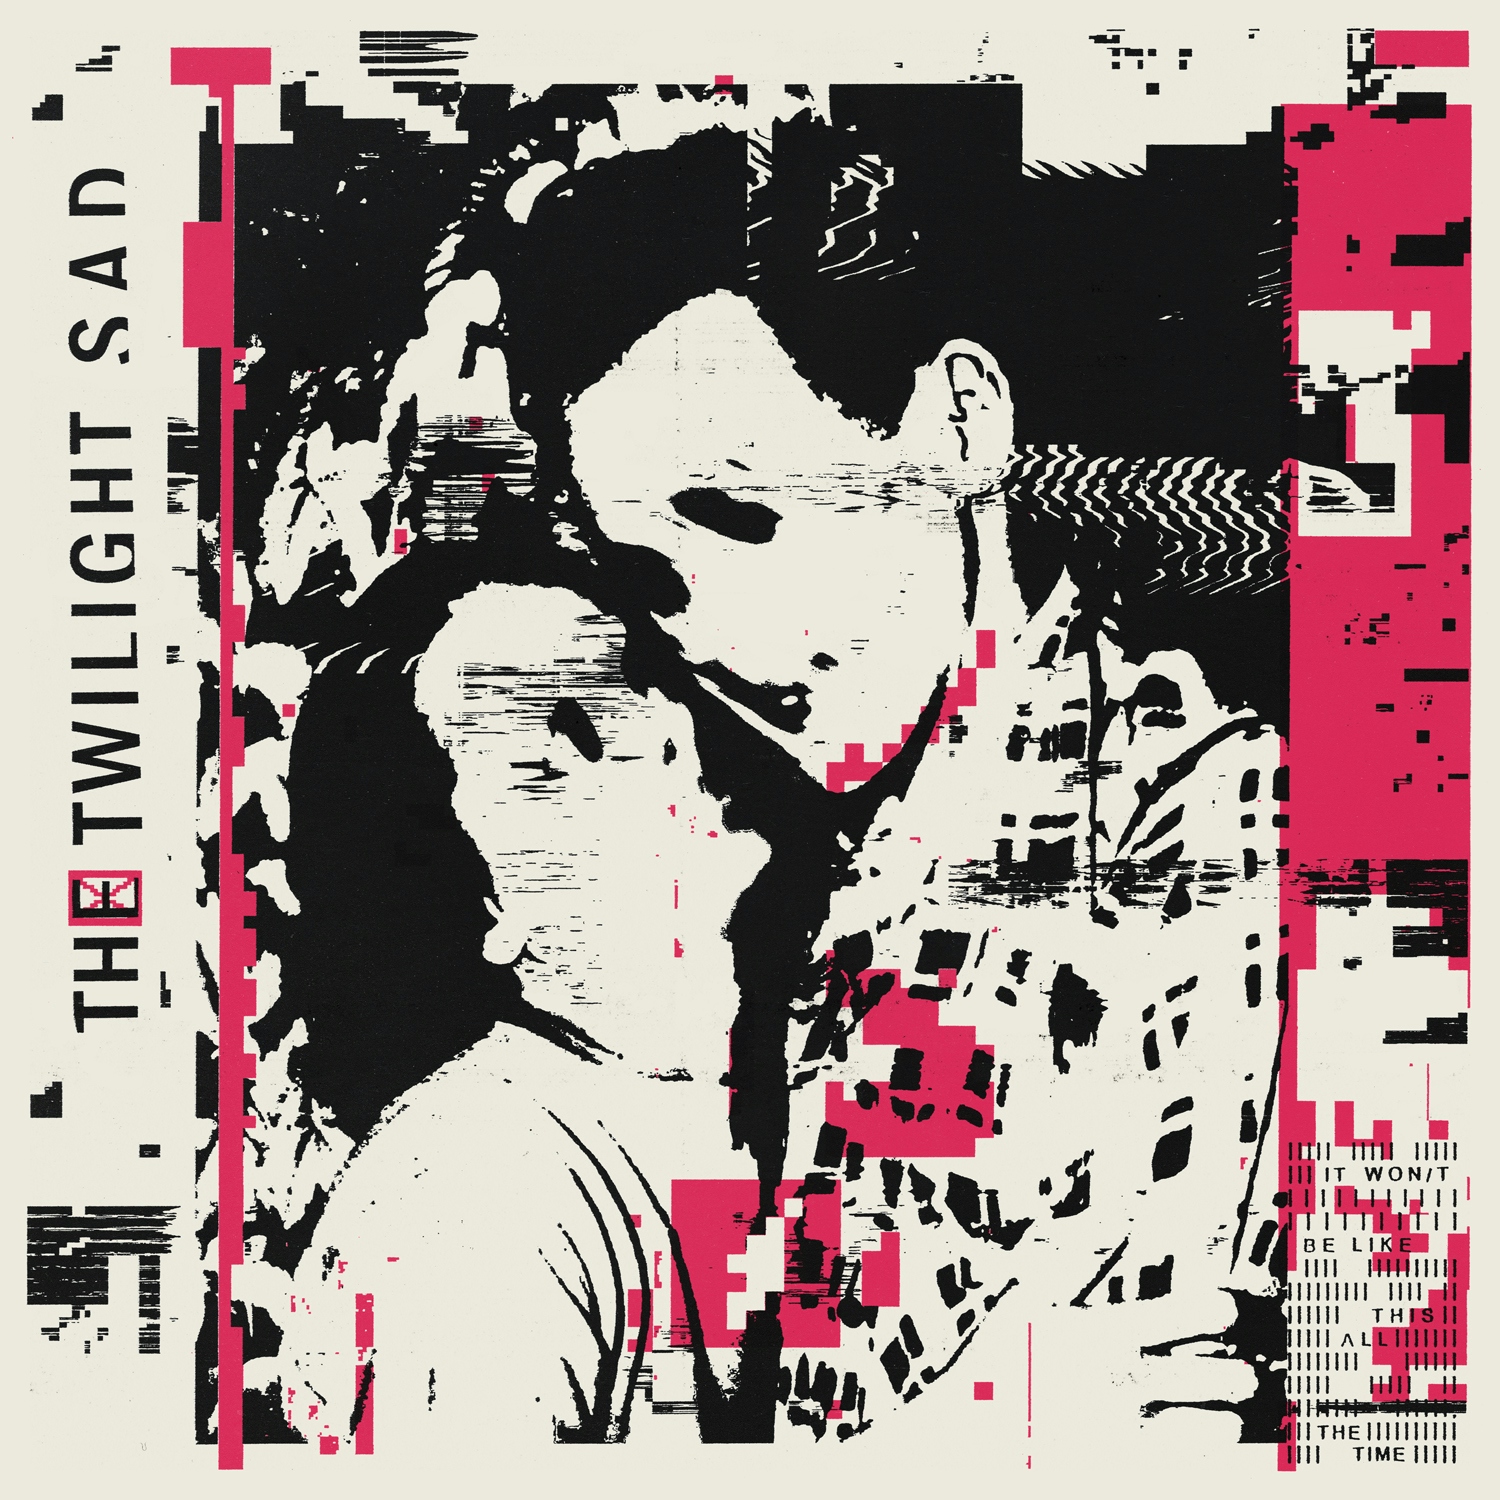 Album artwork for It Won't Be Like This All the Time by The Twilight Sad